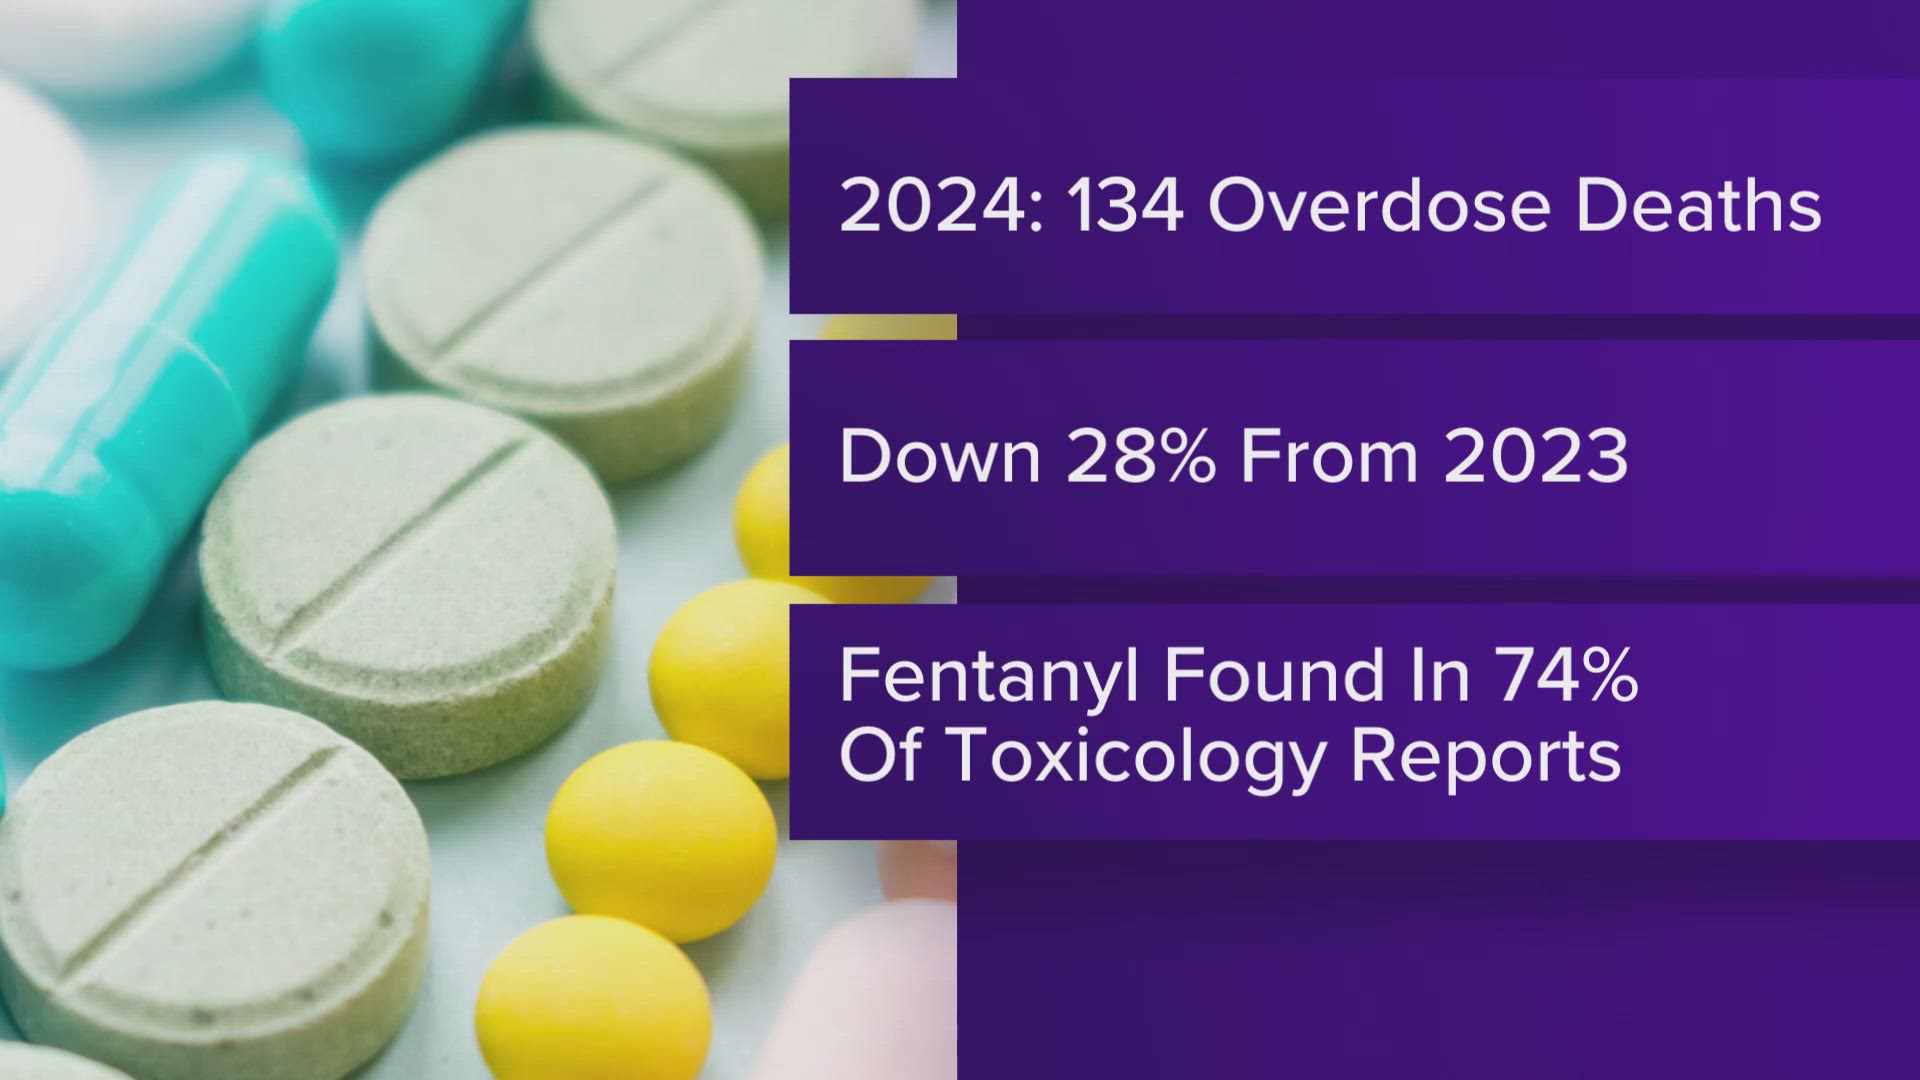 Fentanyl is the most common substance found in toxicology results here.